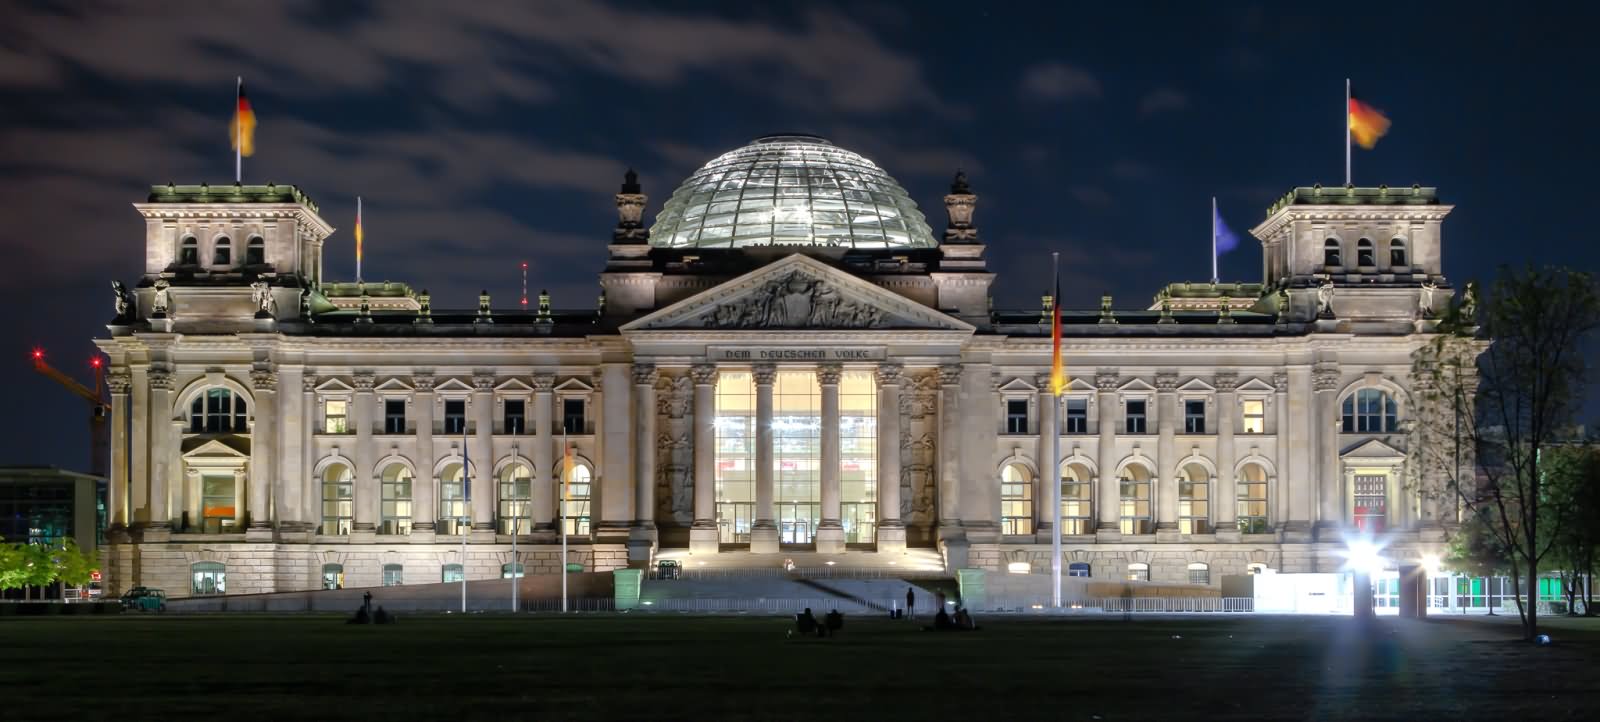 The Reichstag Building And Dome Illuminated At Night